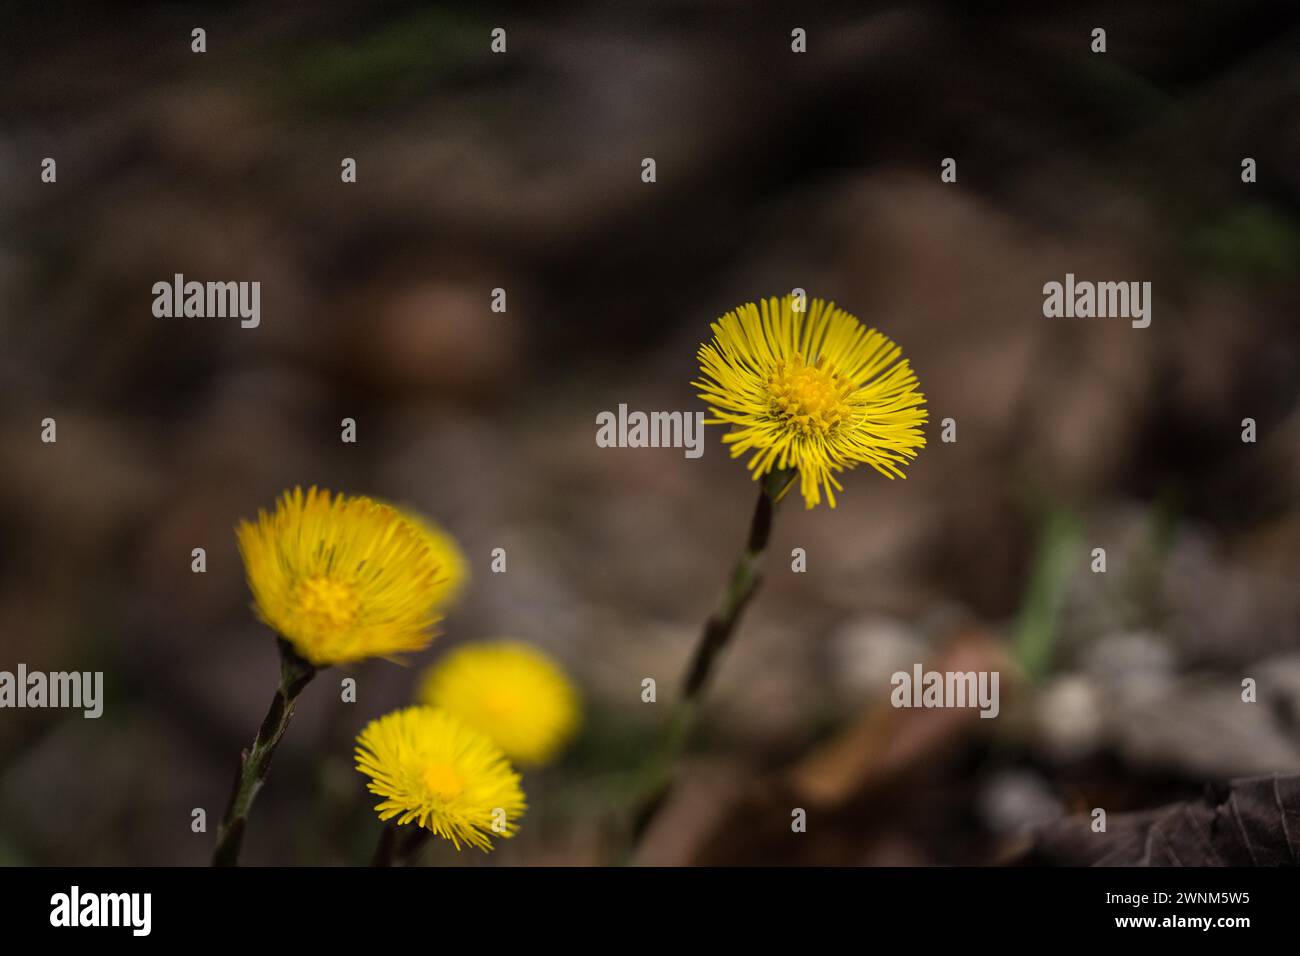 Yellow flowers are in focus against a blurred natural background Coltsfoot Tussilago farfara Stock Photo